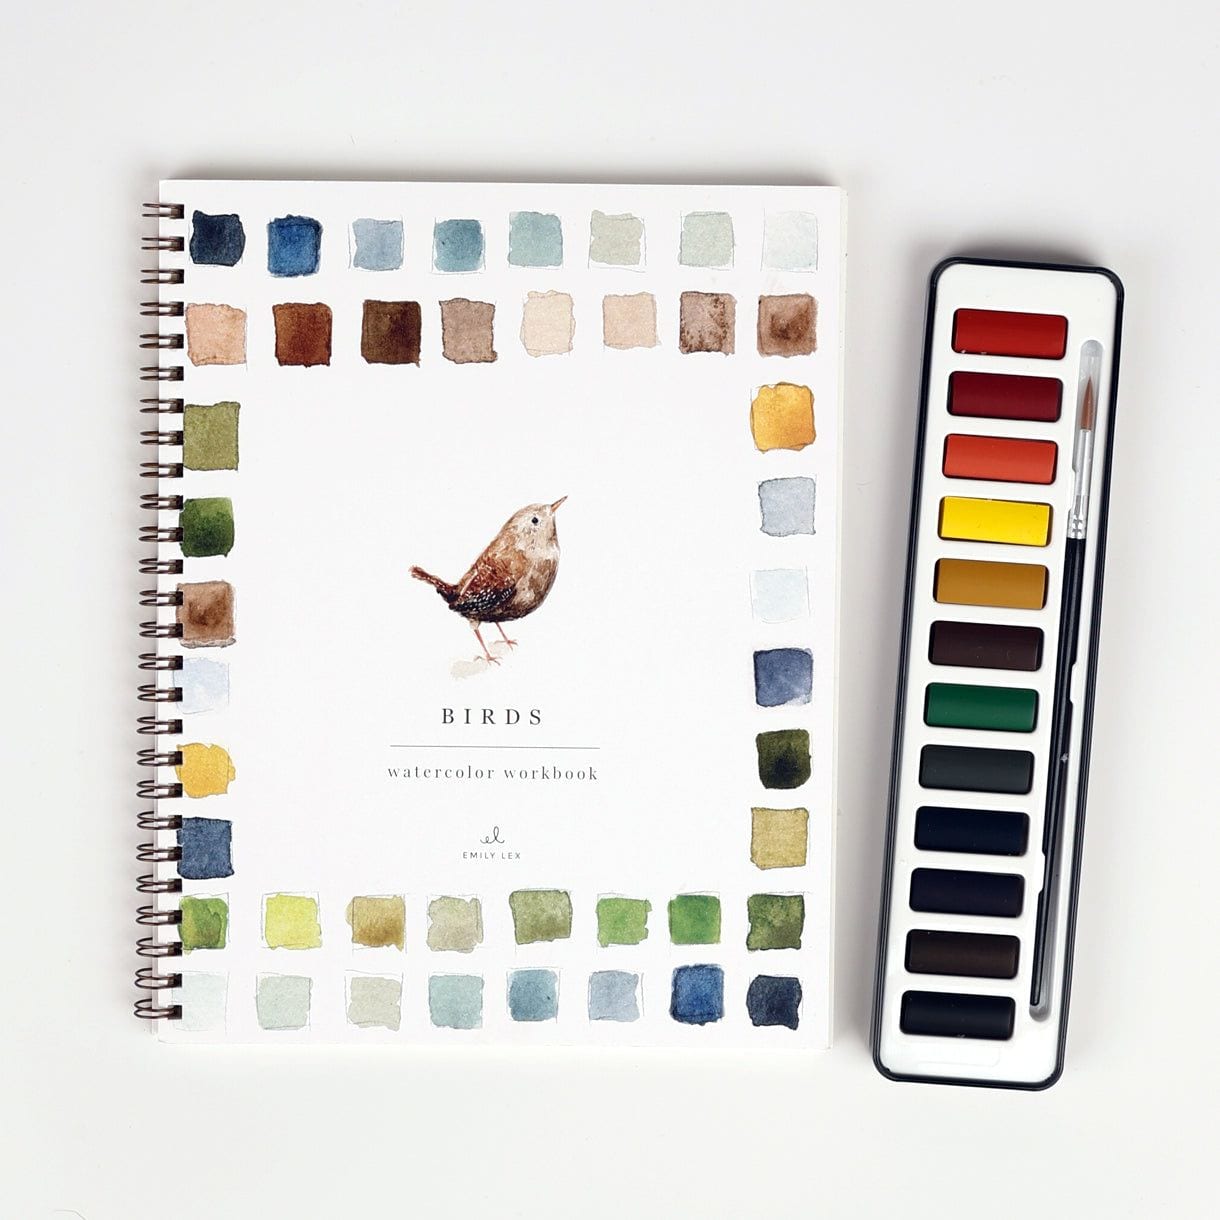 Watercolor Workbook: A Complete Course in Ten Lessons [Book]